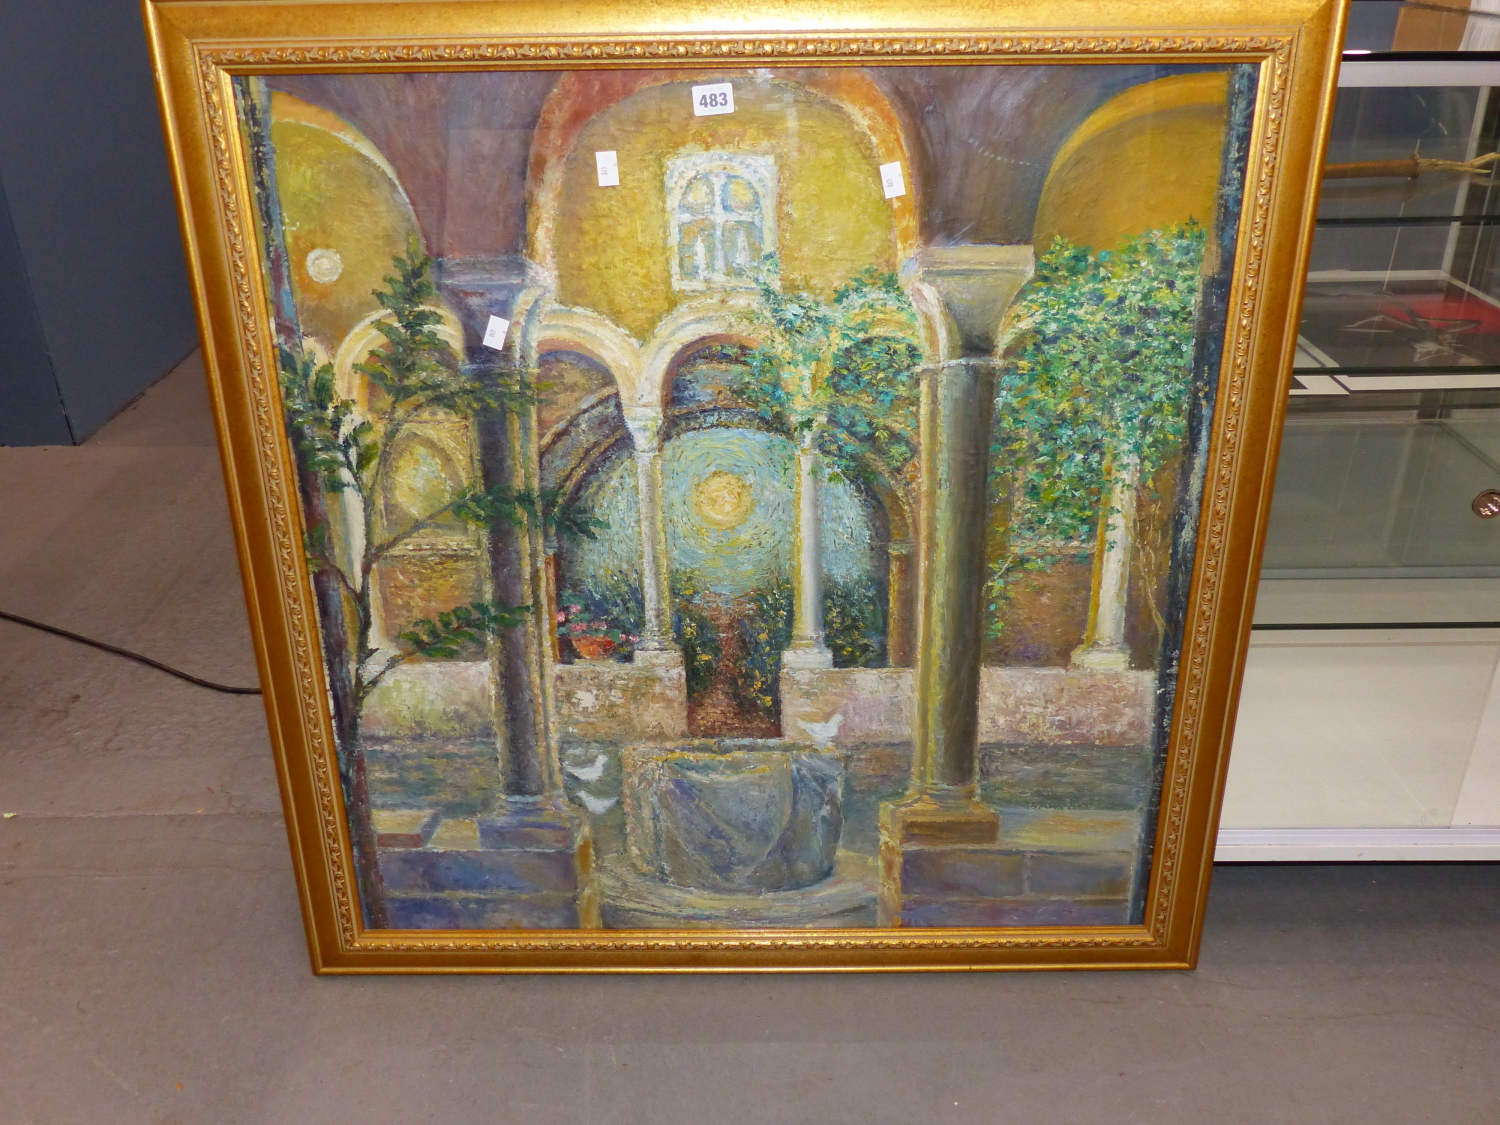 CONTINENTAL SCHOOL (20TH CENTURY), INTERIOR COURTYARD SCENE WITH DOVES AROUND A WELL, IMPASTO OIL, - Image 2 of 6